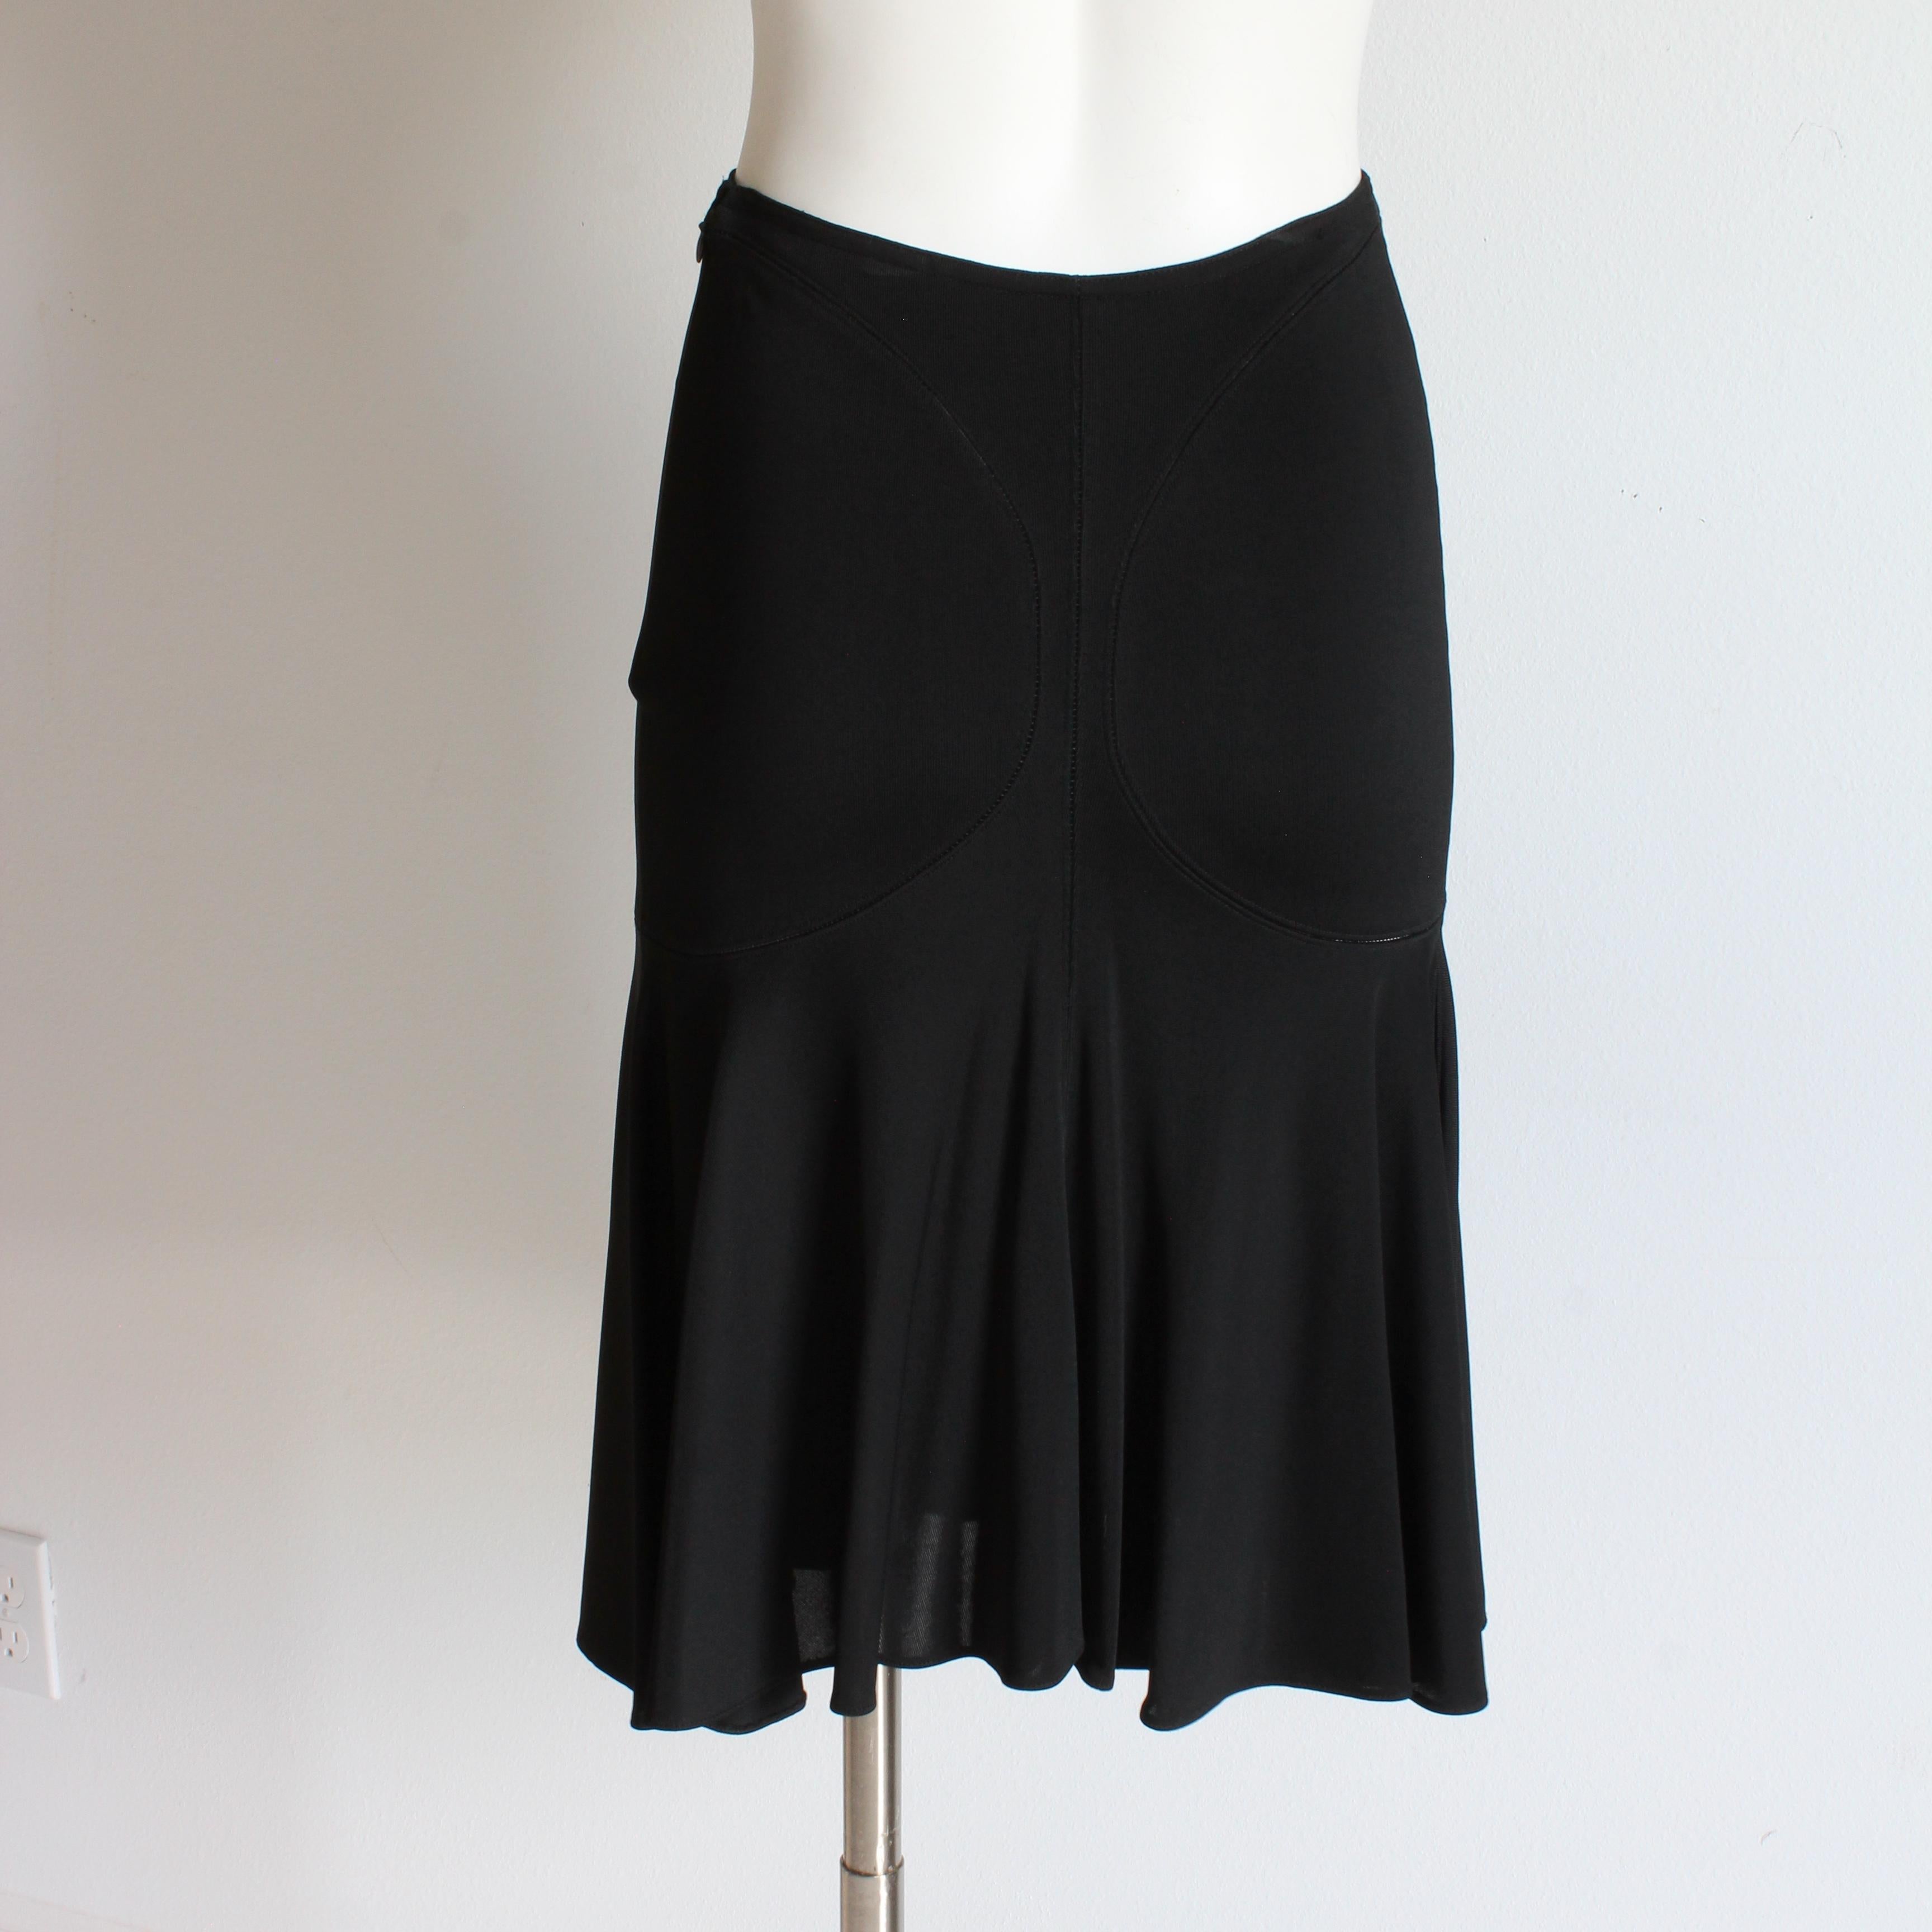 Azzedine Alaïa Skirt Fitted Bodycon Tulip Flare Hem Black Vintage 90s Size S  In Good Condition For Sale In Port Saint Lucie, FL